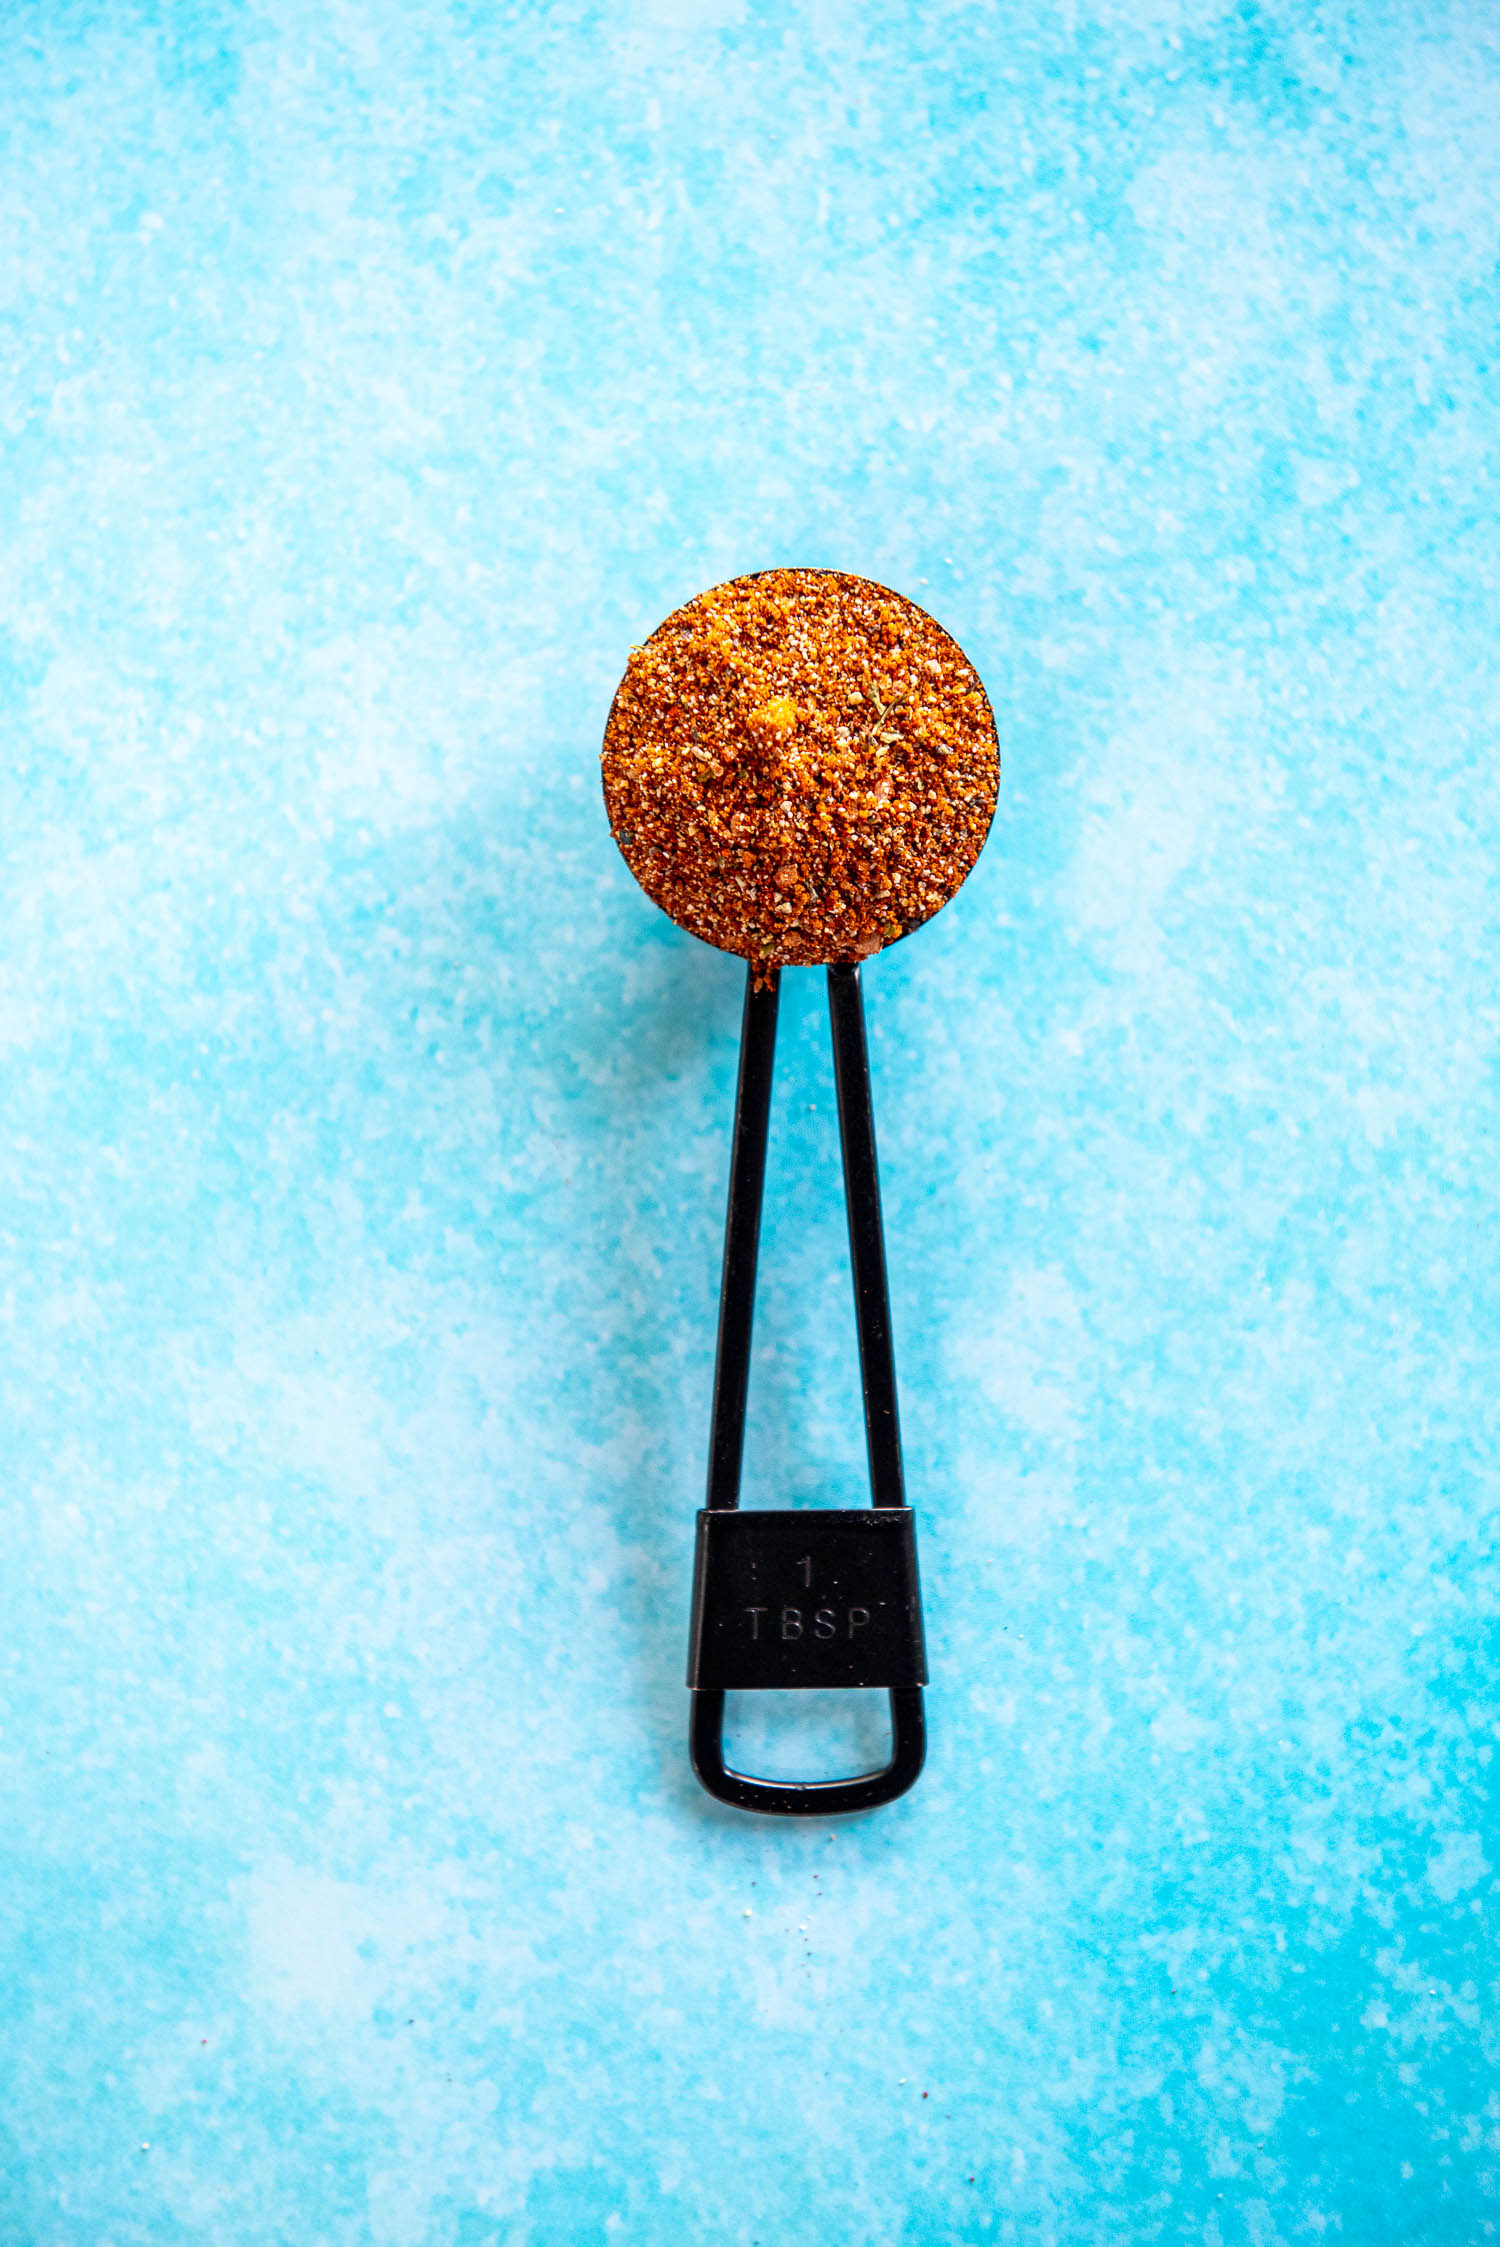 tablespoon filled with bbq rub seasoning on blue background